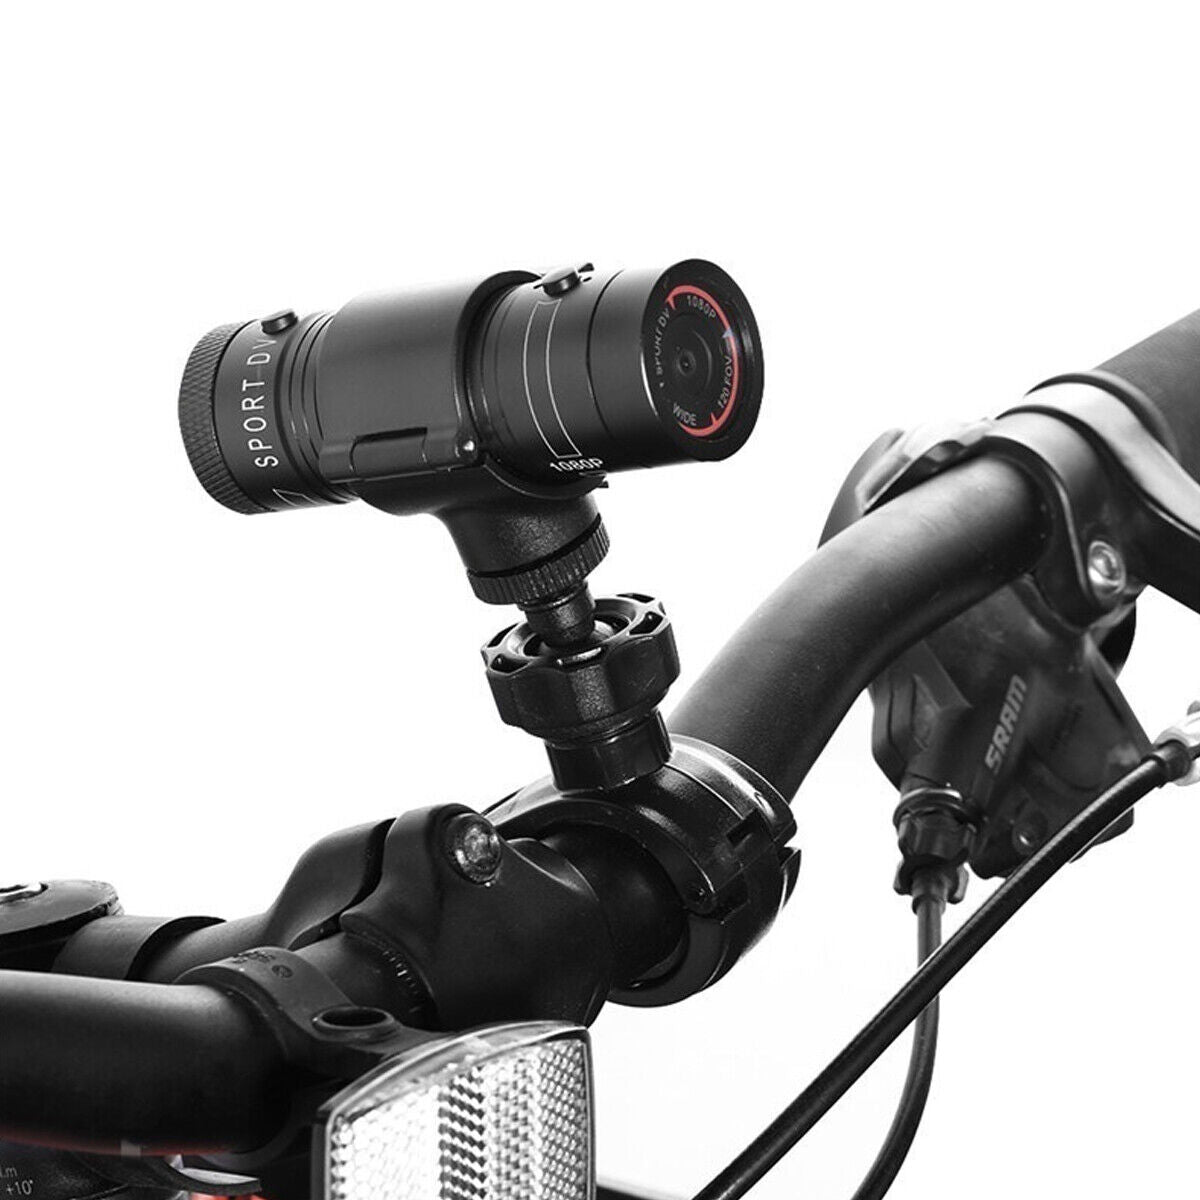 Empower Your Ride: Bike Dash Cam Capturing the Thrills – Mounted Securely on Handlebars for Every Adventure.